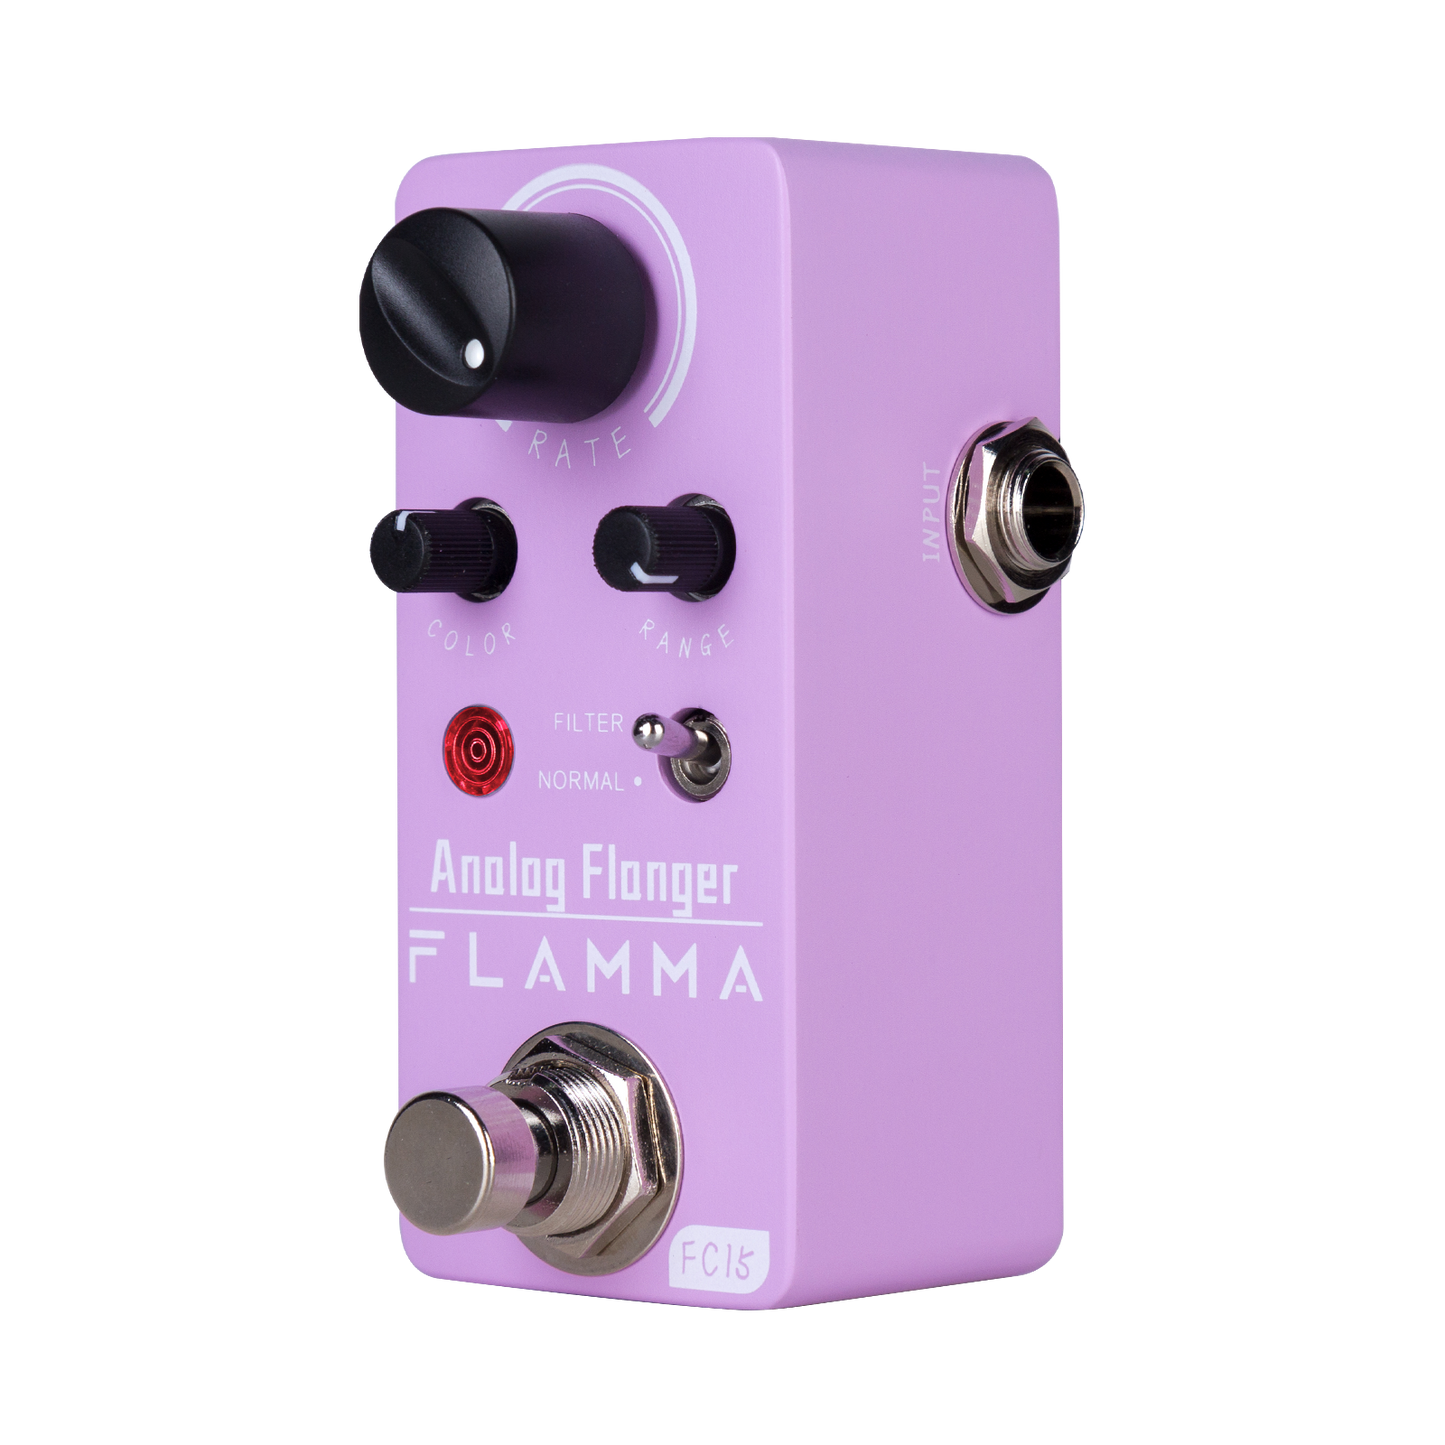 FLAMMA FC15 Classic Analog Flanger with Filter and Oscillator